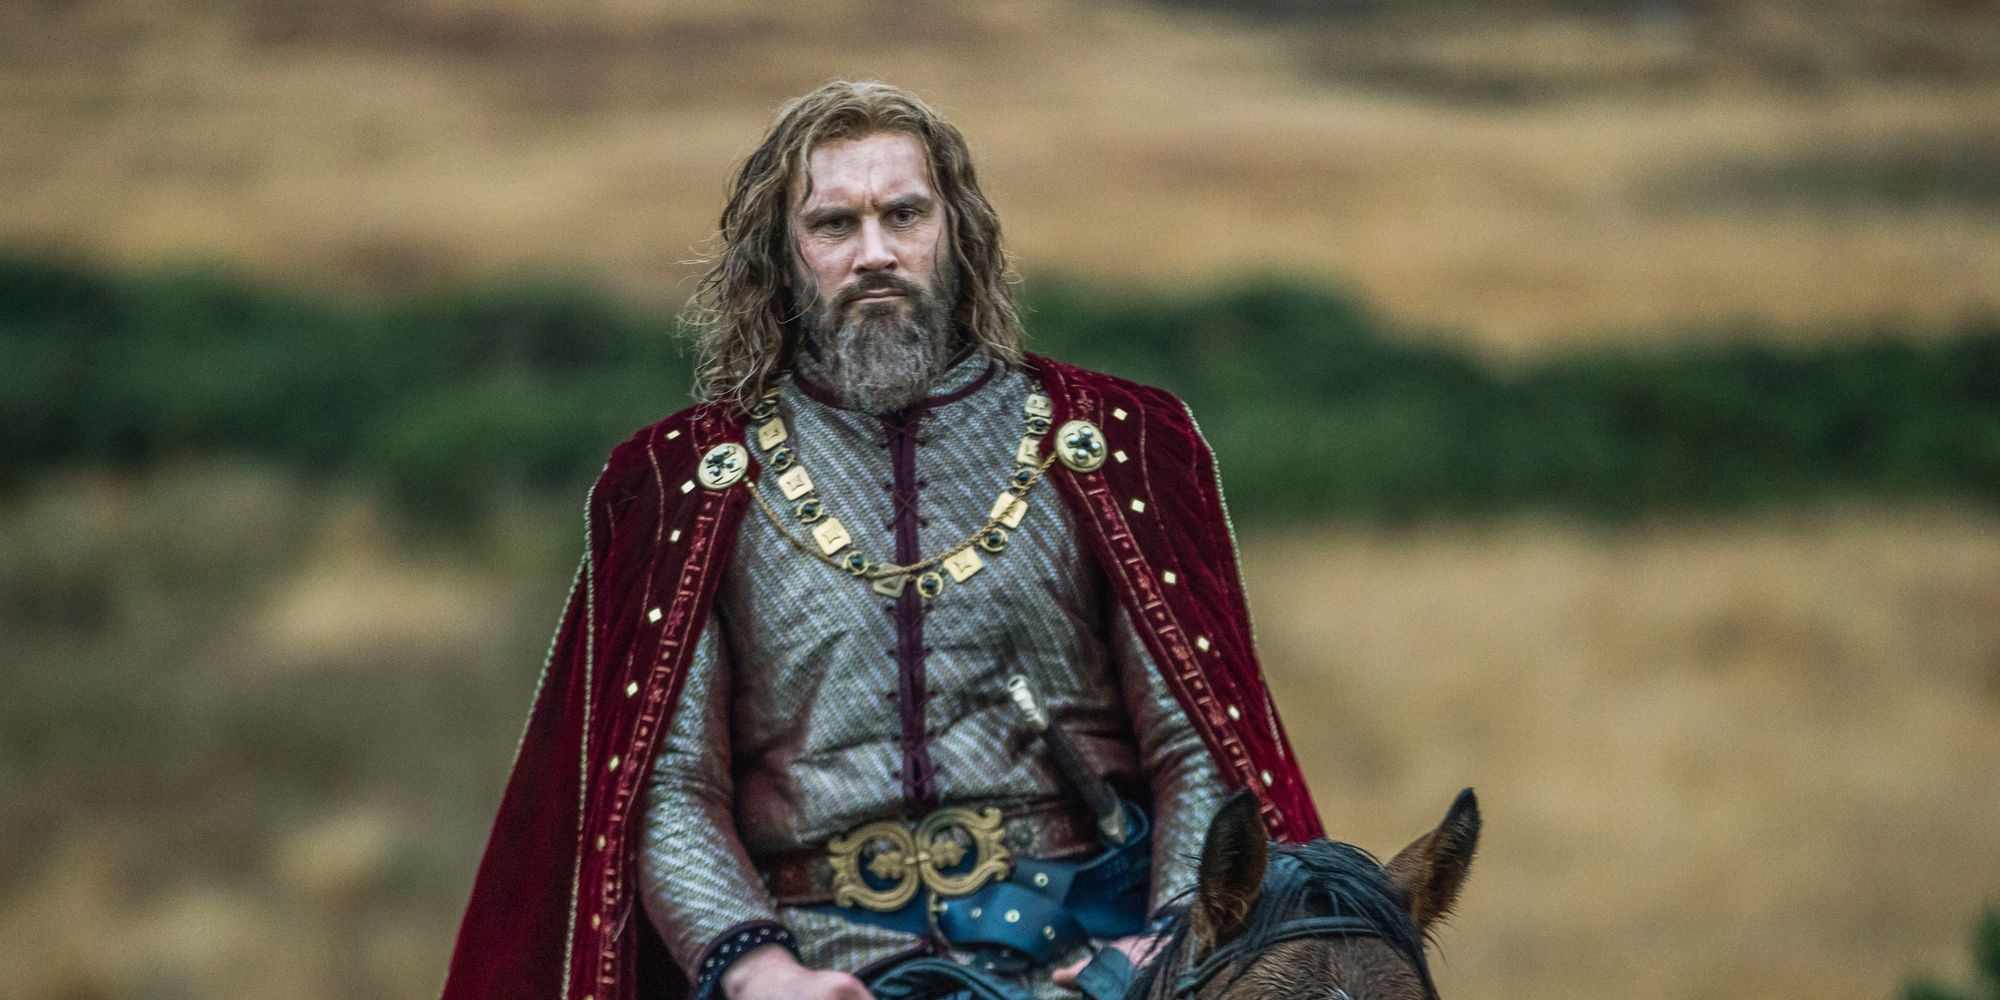 What To Expect From Vikings Season 6